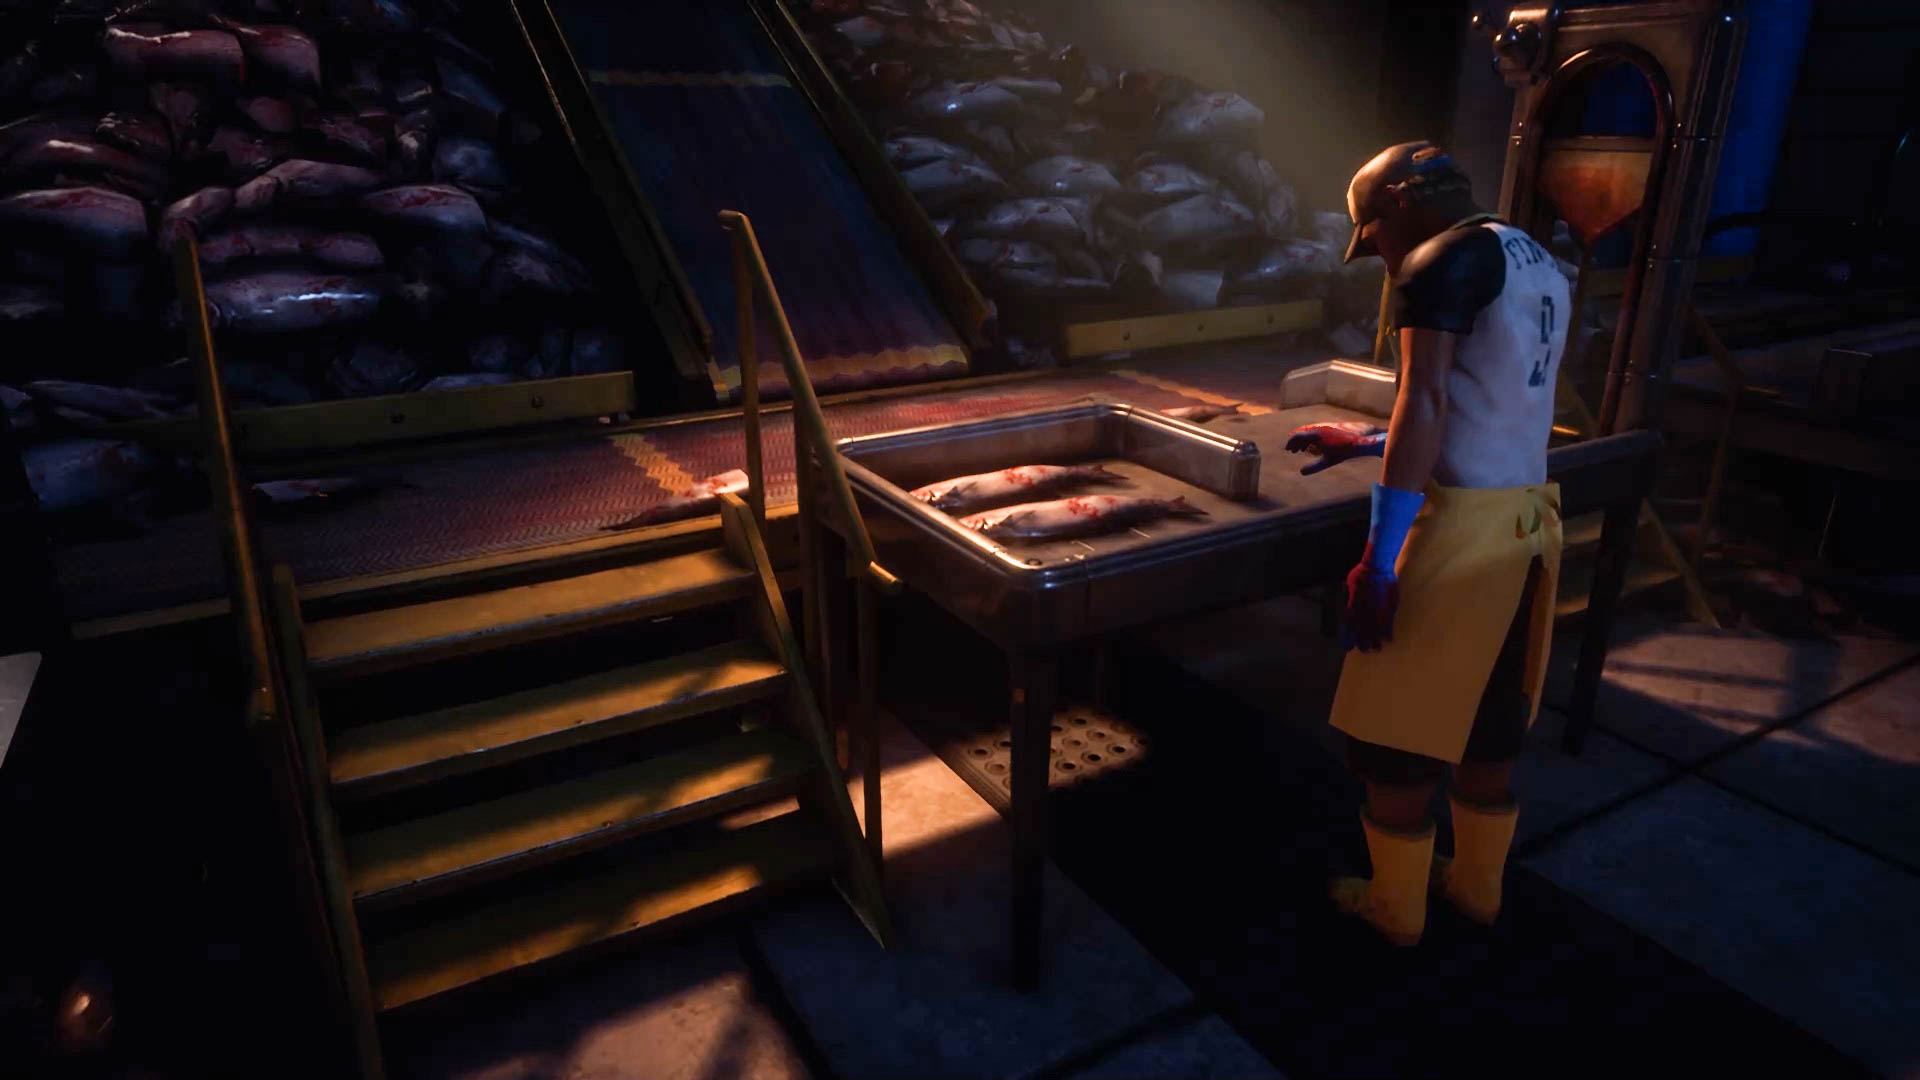 What Remains of Edith Finch factory worker